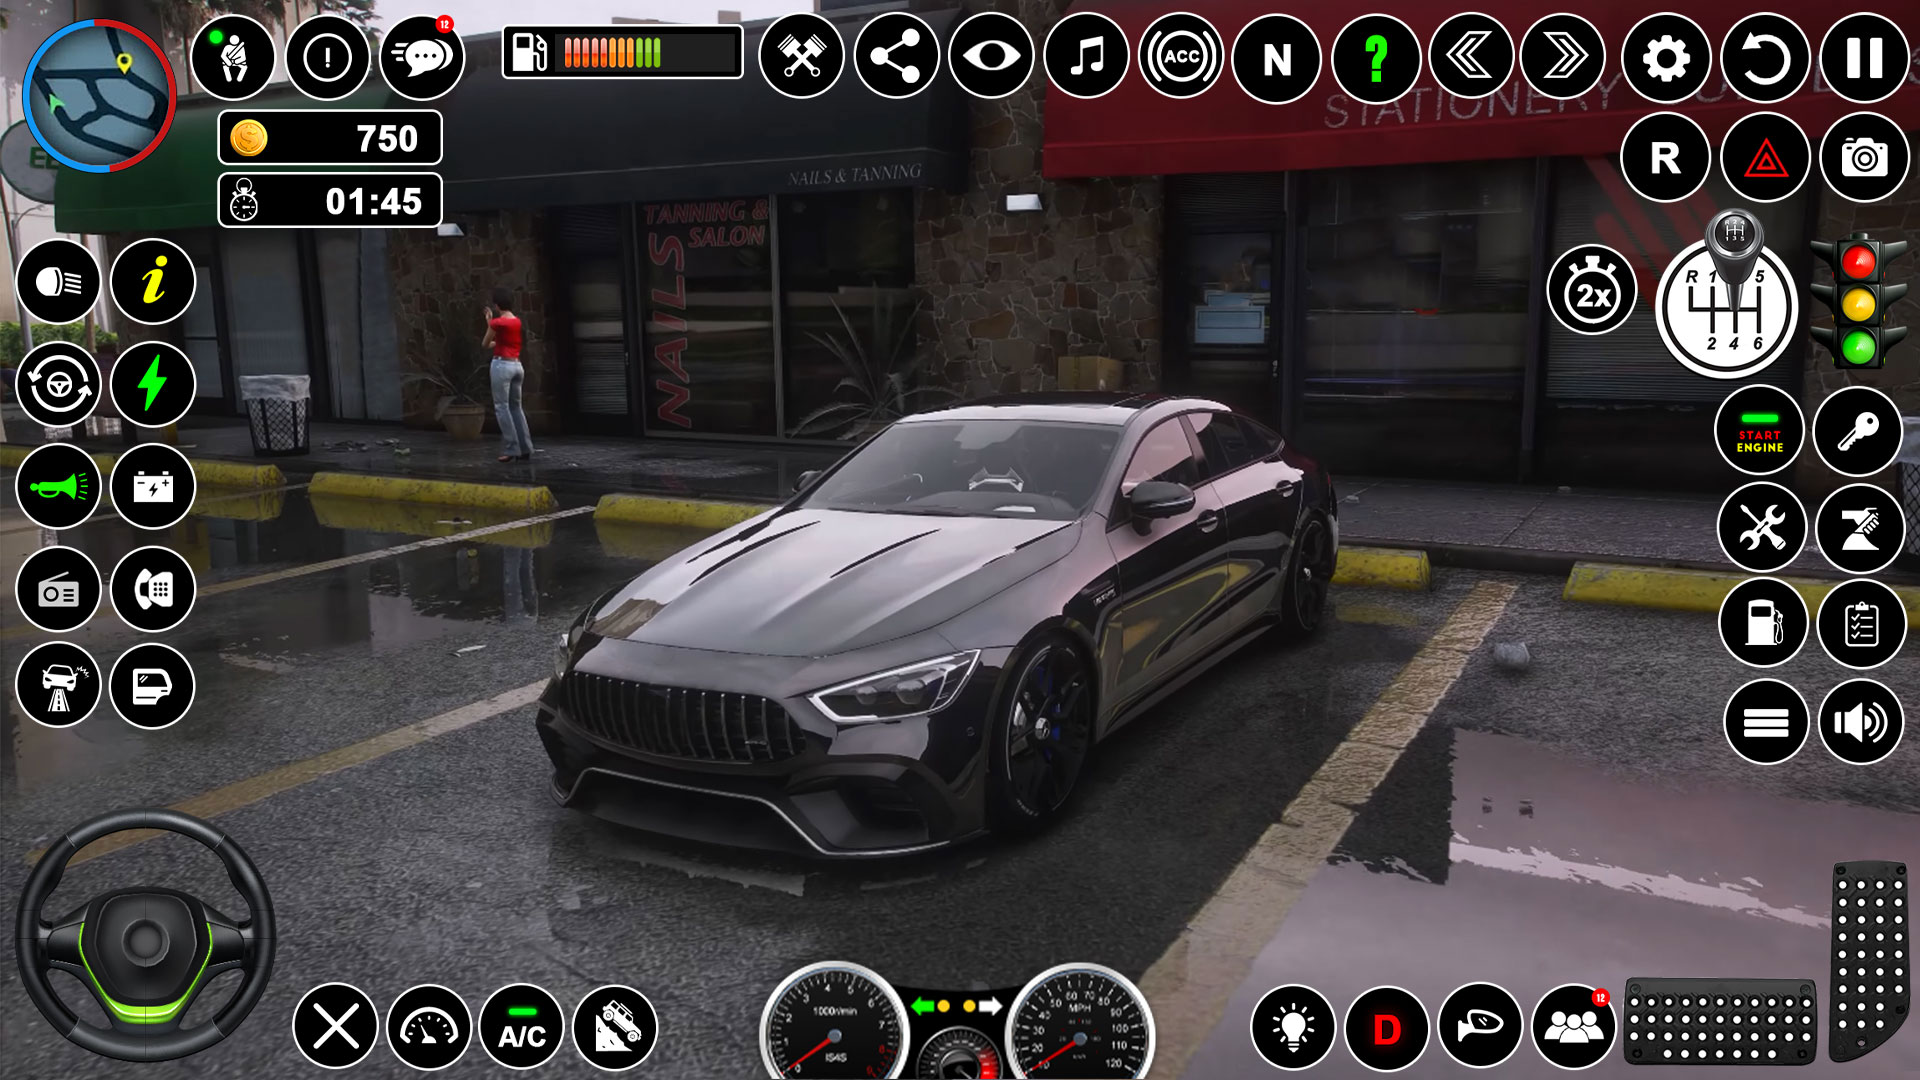 Real Car Parking : Multiplayer on the App Store